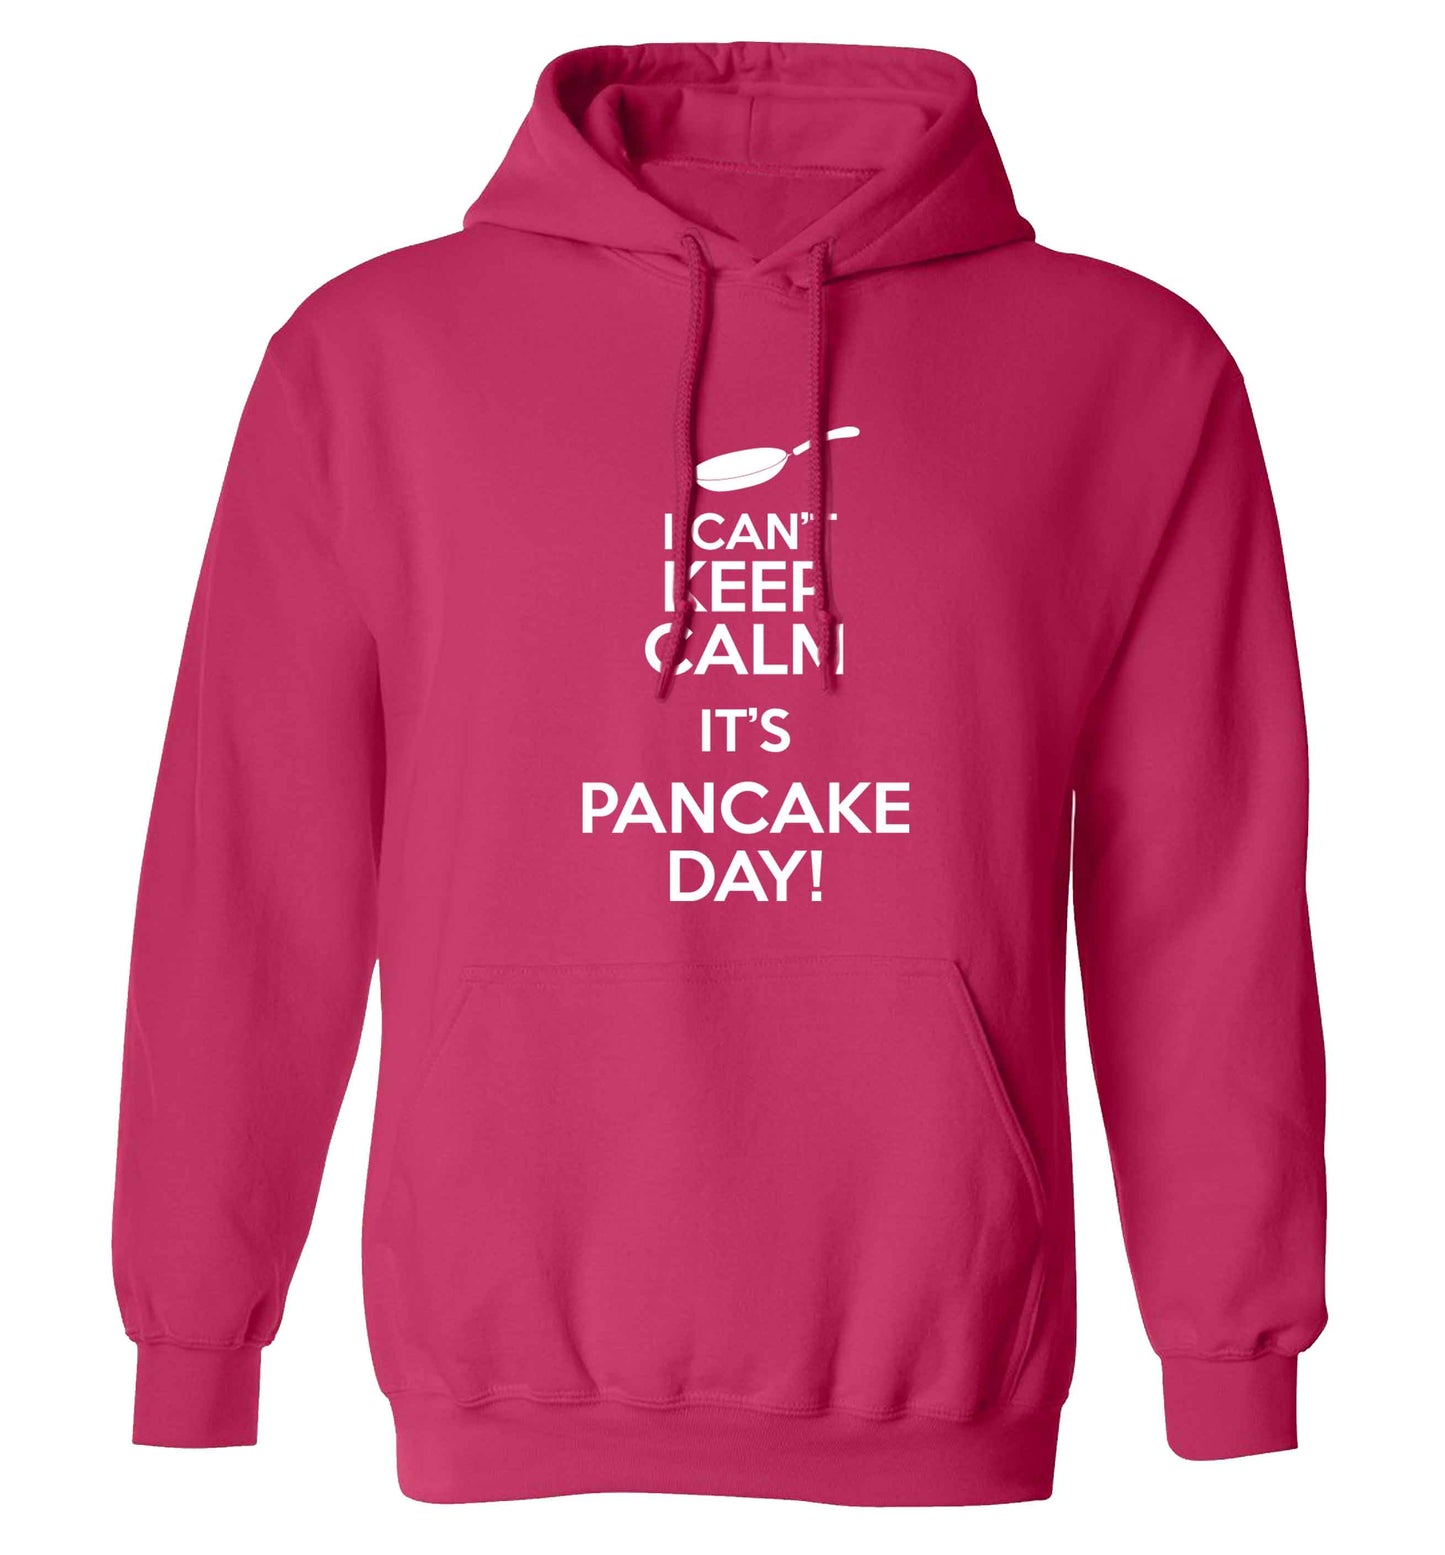 I can't keep calm it's pancake day! adults unisex pink hoodie 2XL